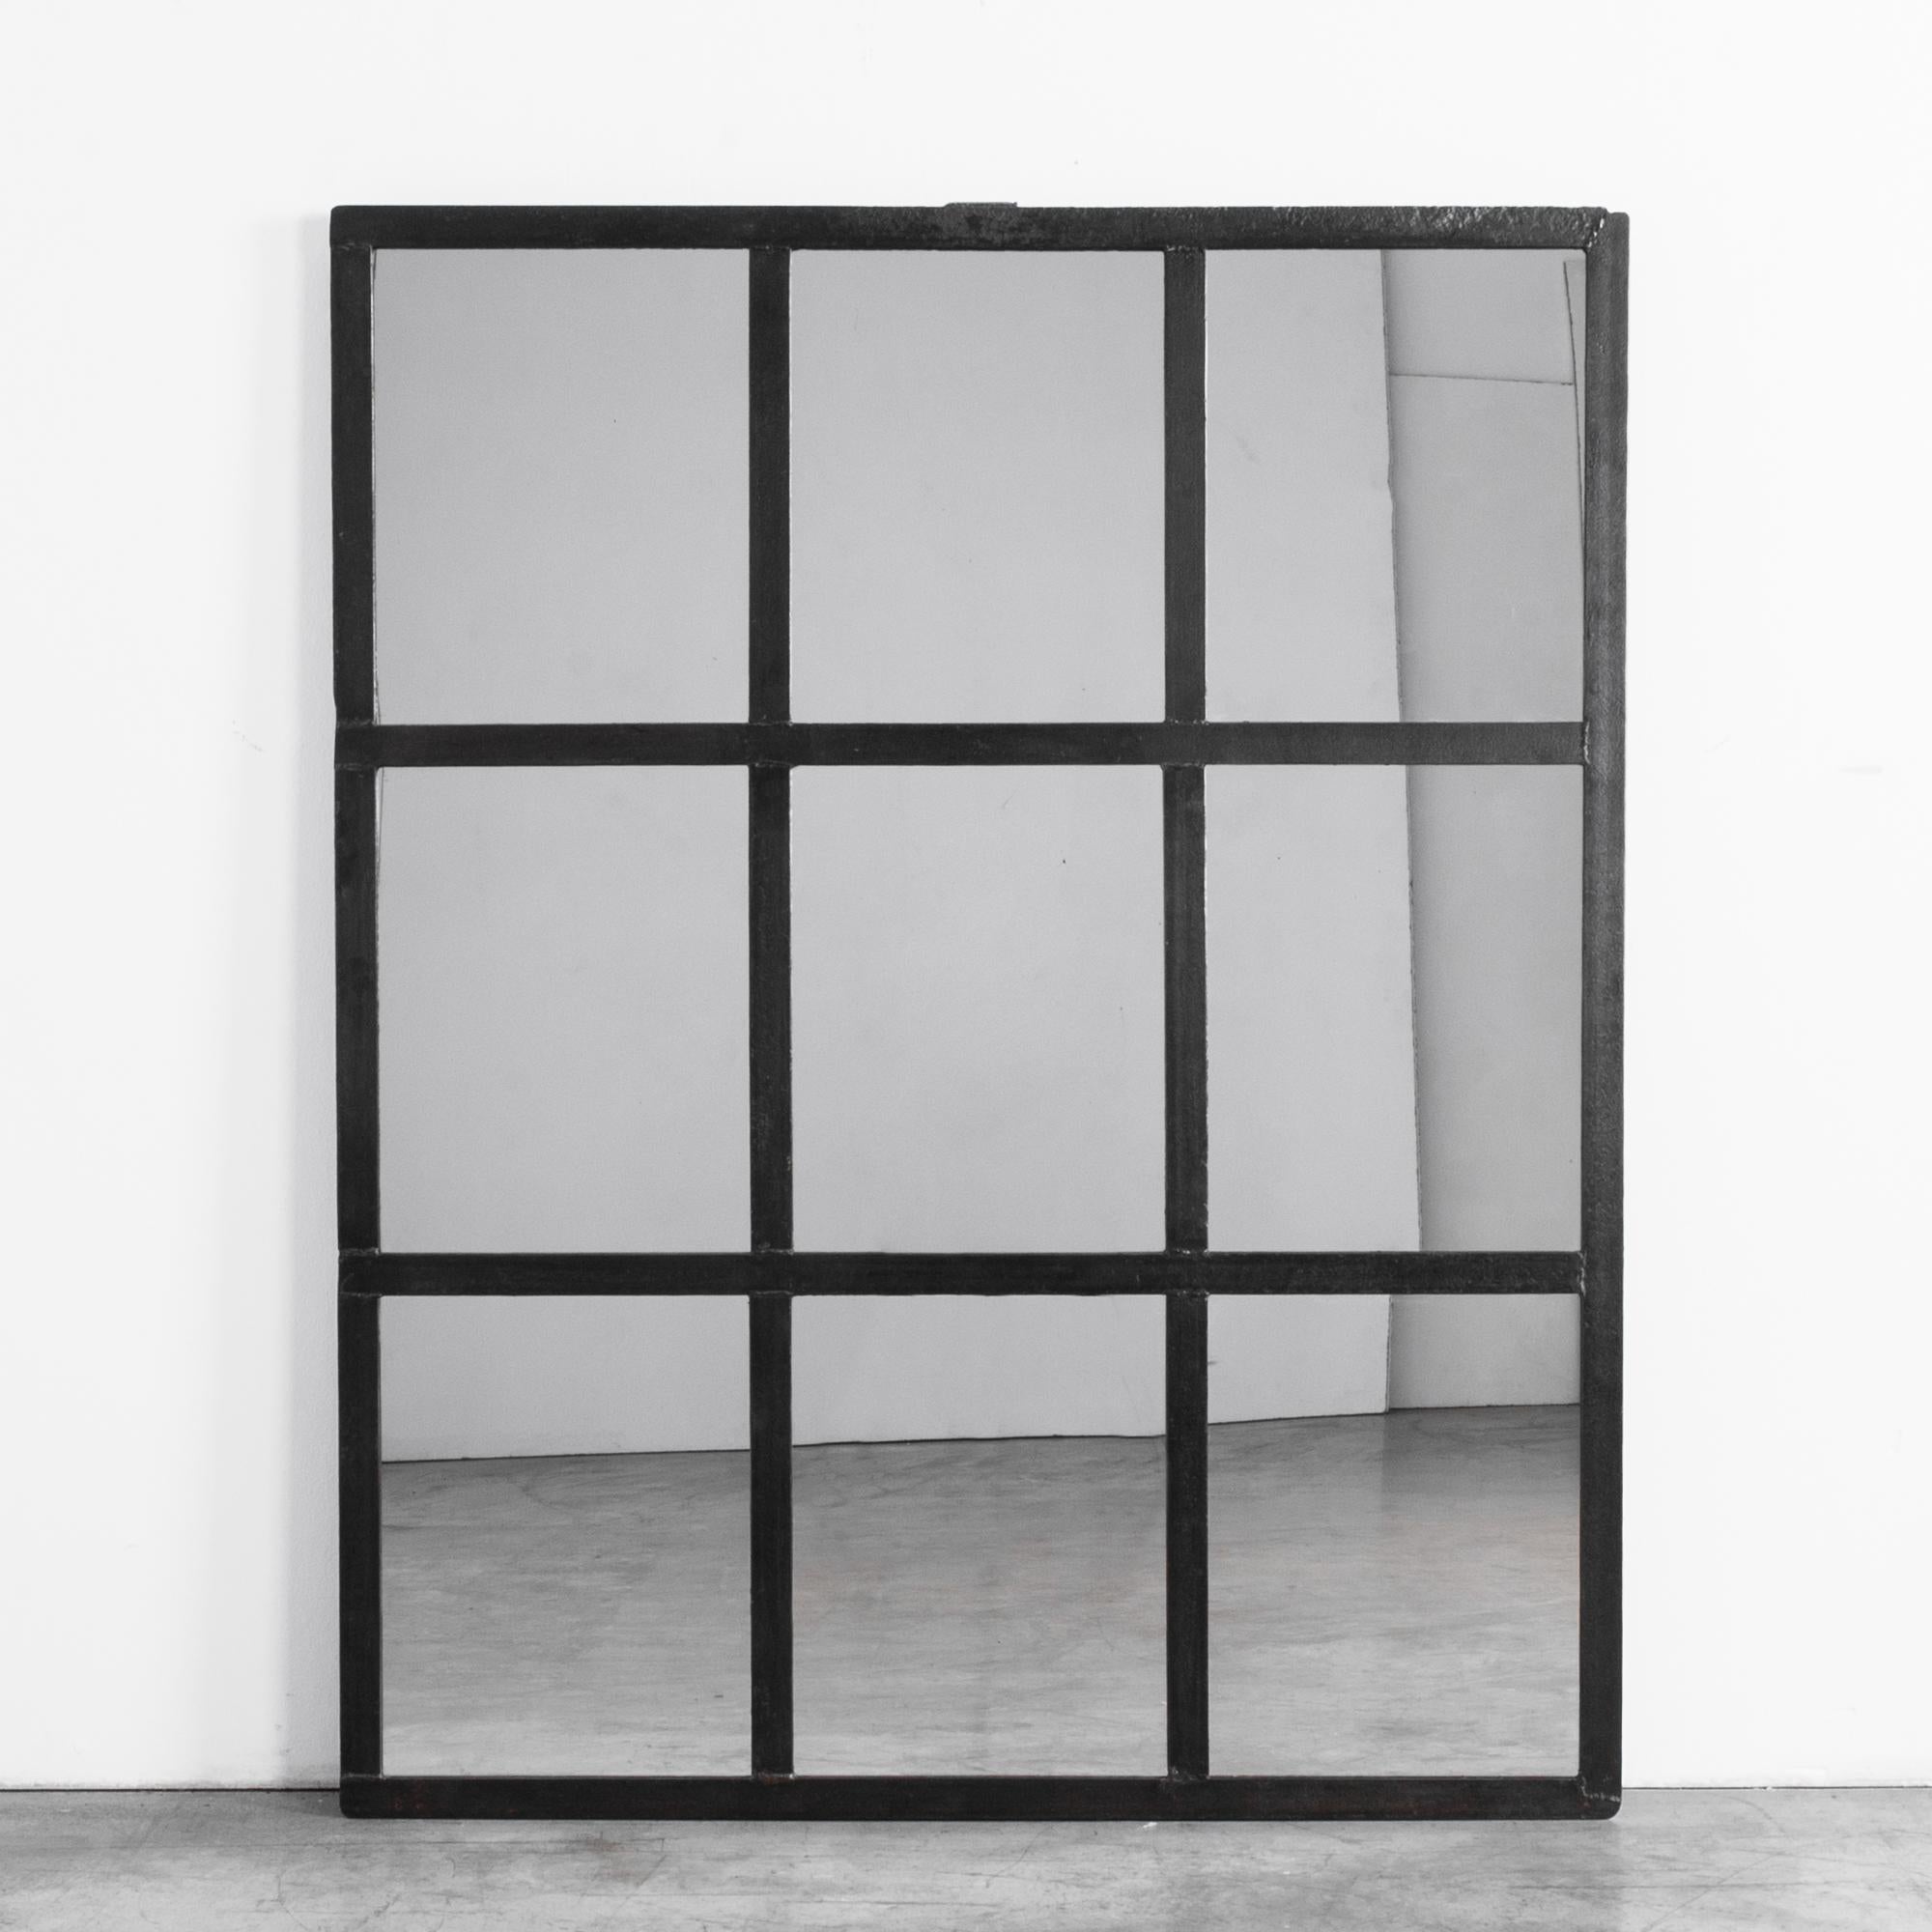 A floor mirror with a metal frame repurposed from a 1950s Czech factory window. A three by three grid of cast metal is fitted with panes of mirrored glass. Purpose built, the rigid lines and dark color of the frame emphasize the post-industrial